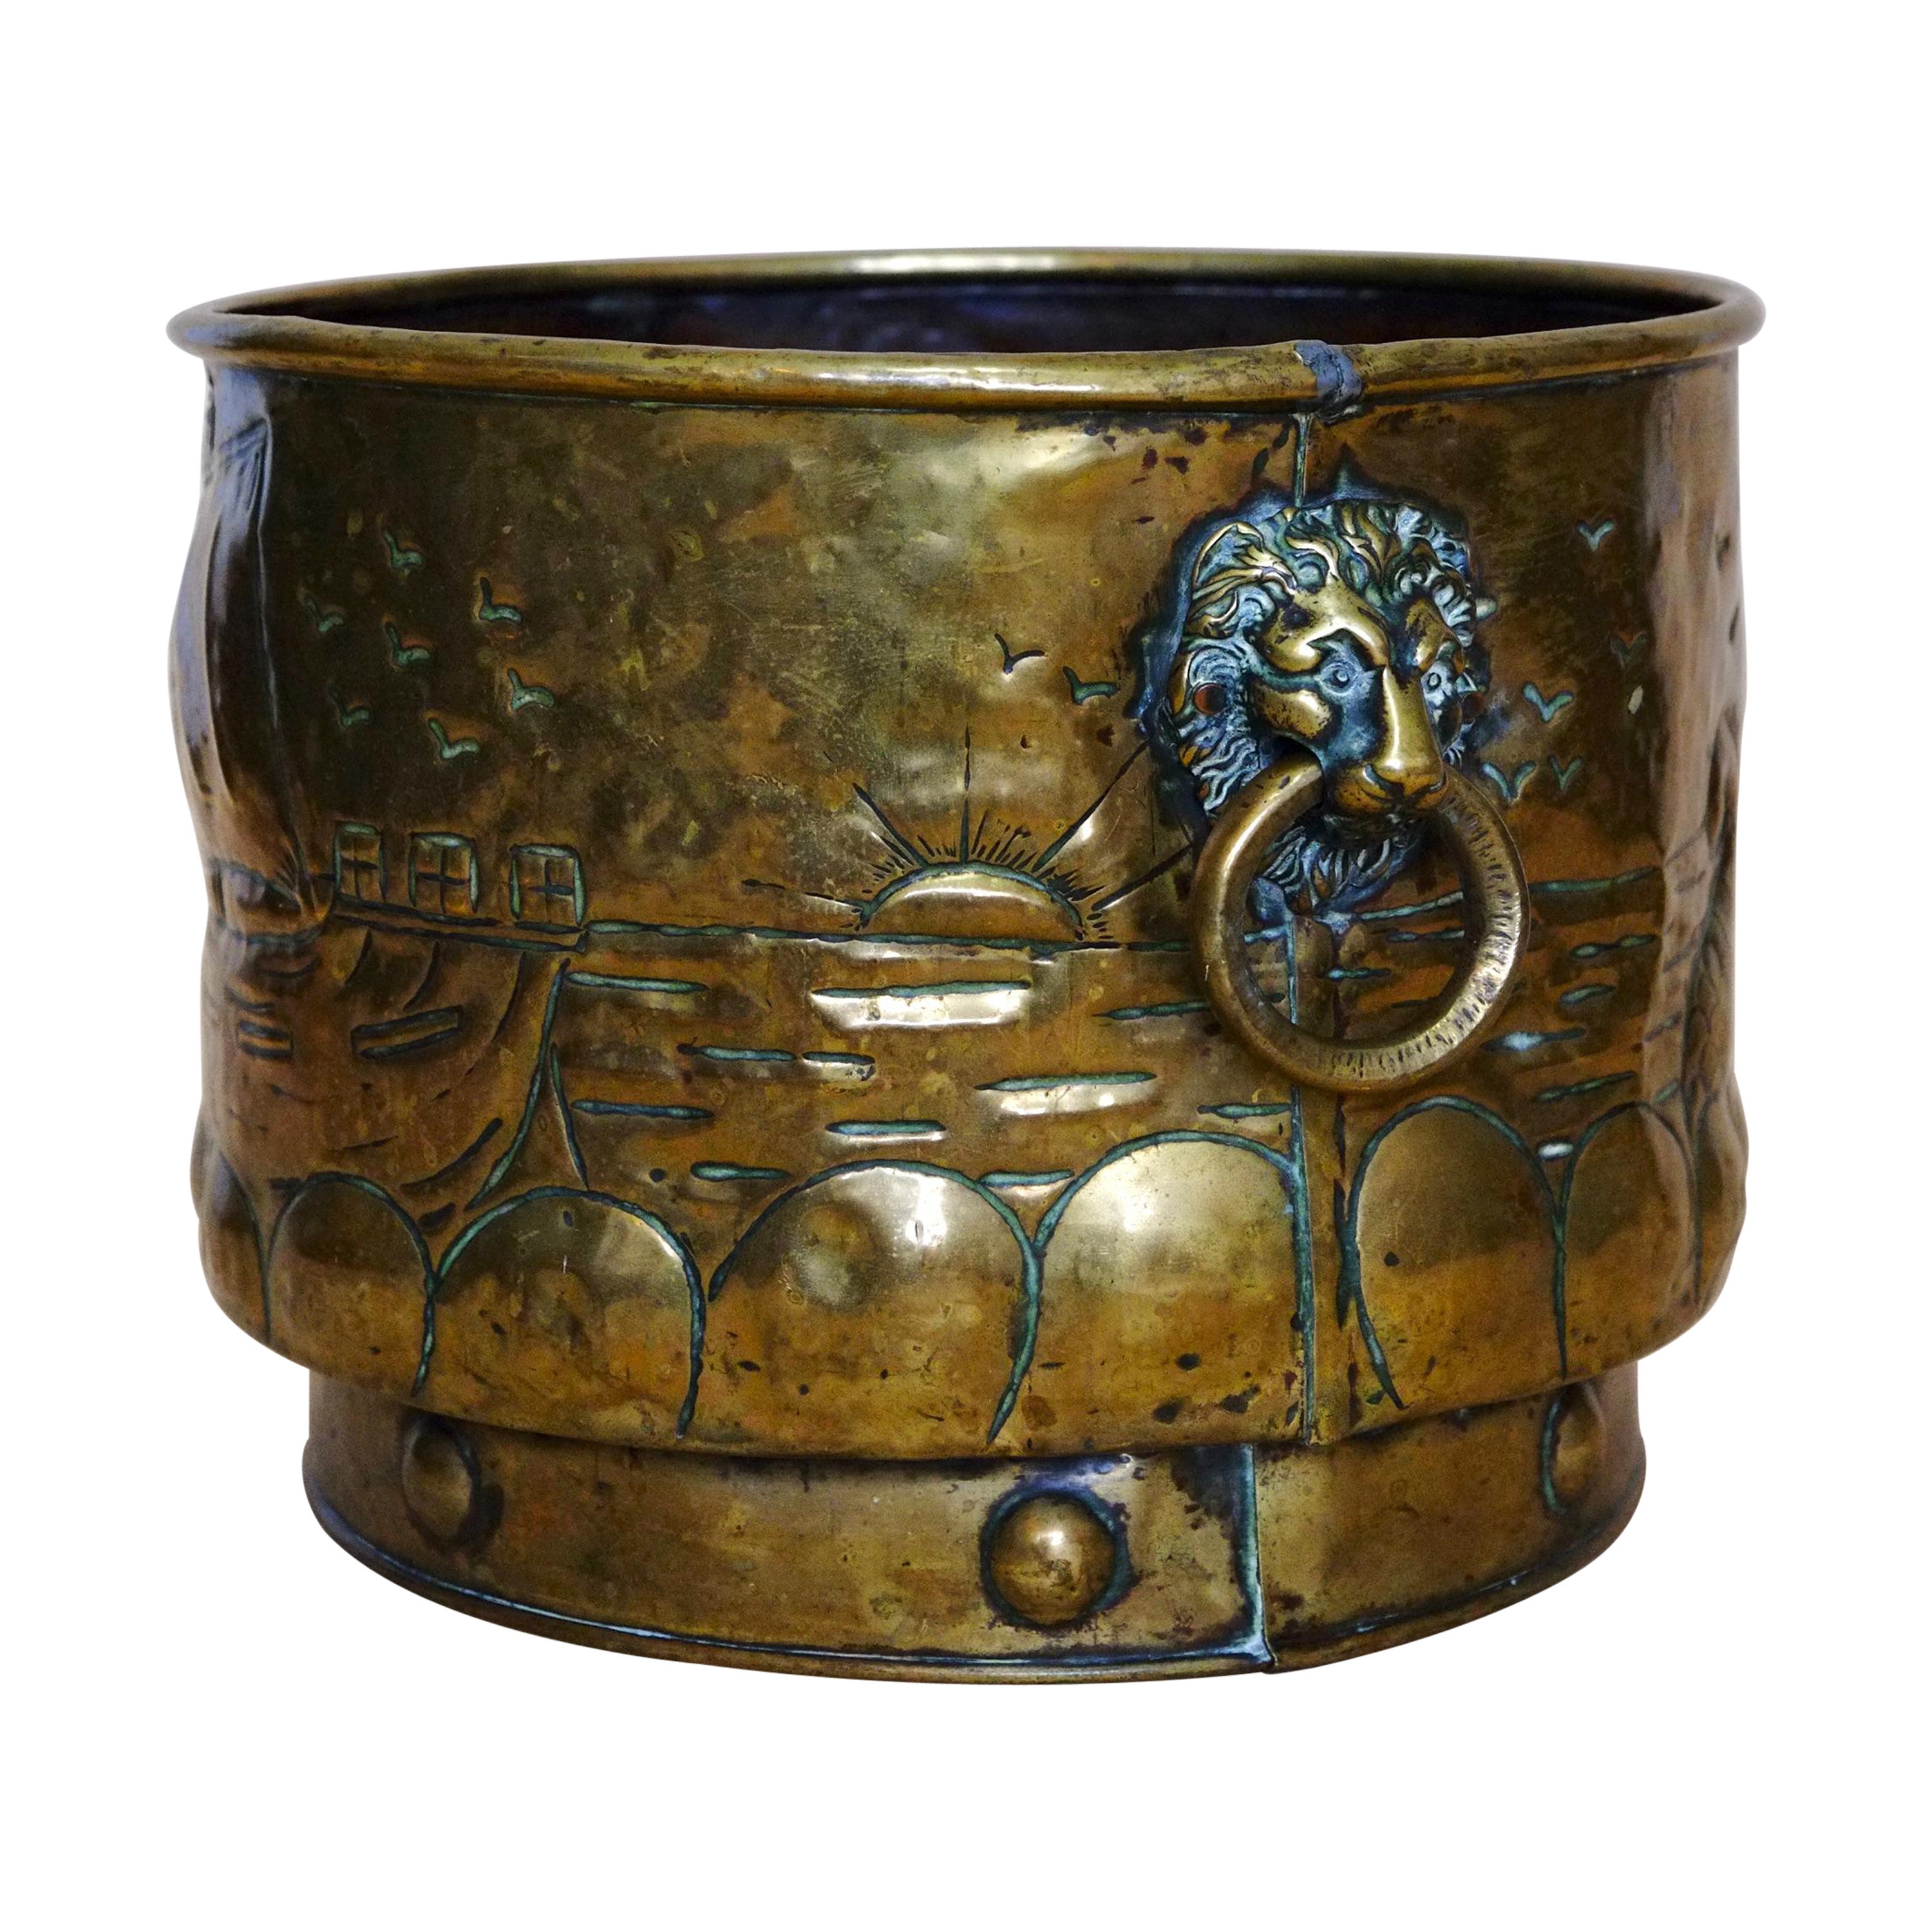 Extra large solid brass log bucket. England circa 1880. A gorgeous antique piece with lion head handles and a decorative viking ship hand embossed motif. This bucket has a deep collared base with circular decorations. Lots of character and patina.